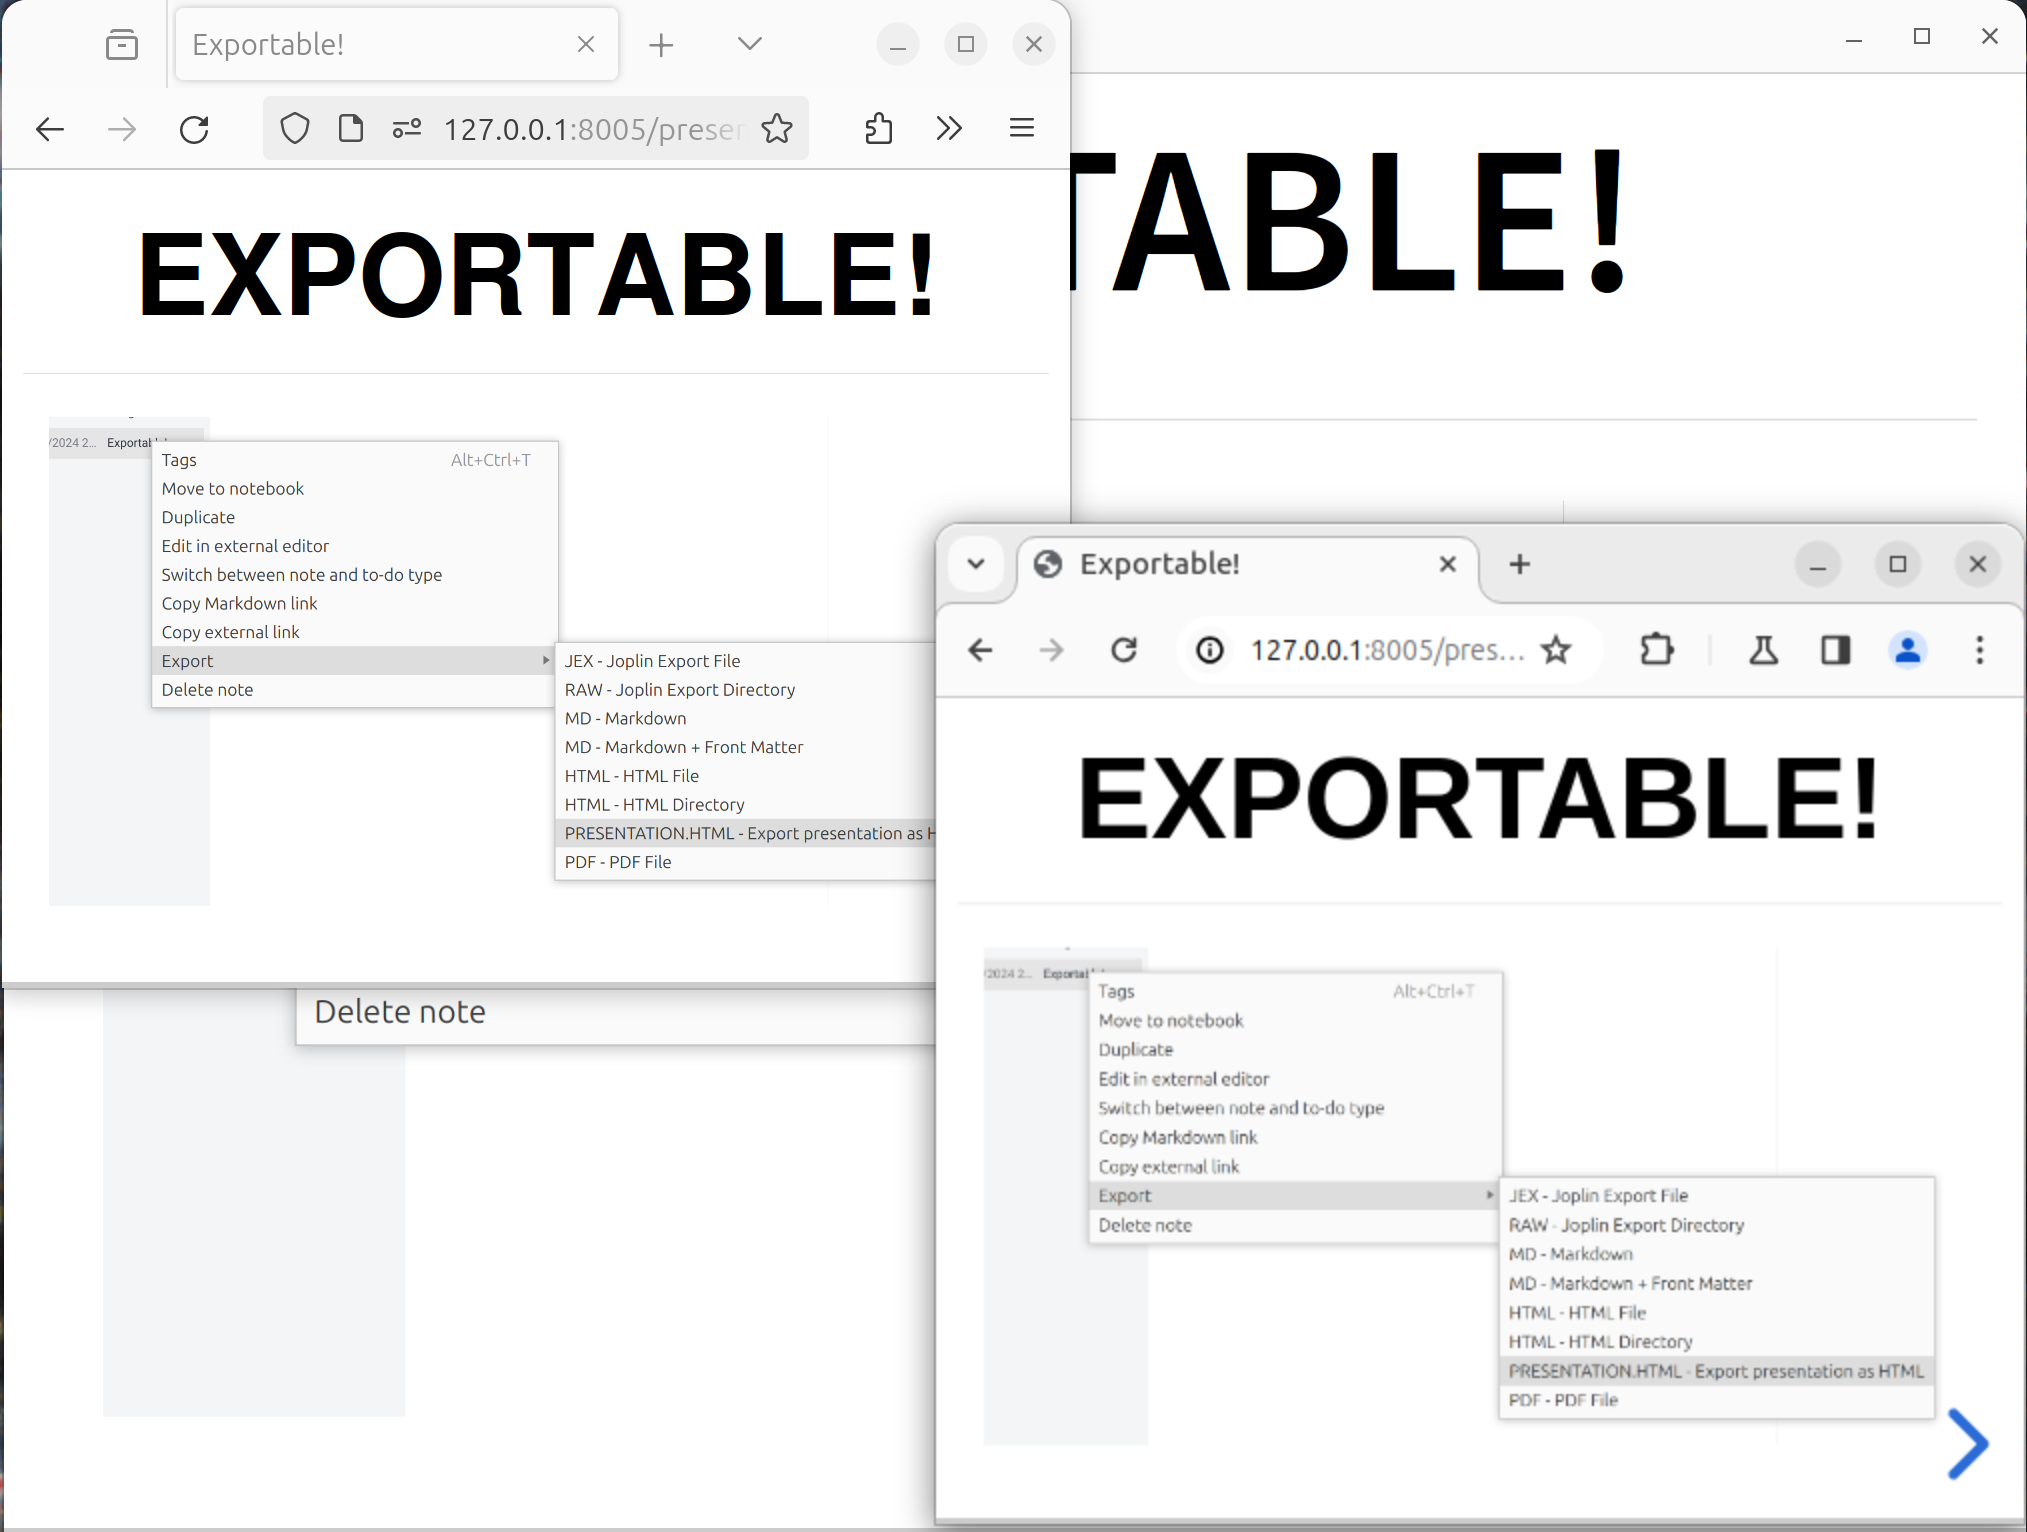 Screenshot: Shows multiple presentations running at once, some in web browsers. The presentation has a heading of 'Exported!' and shows the export section of a right-click menu for a note, with the PRESENTATION.HTML option highlighted.